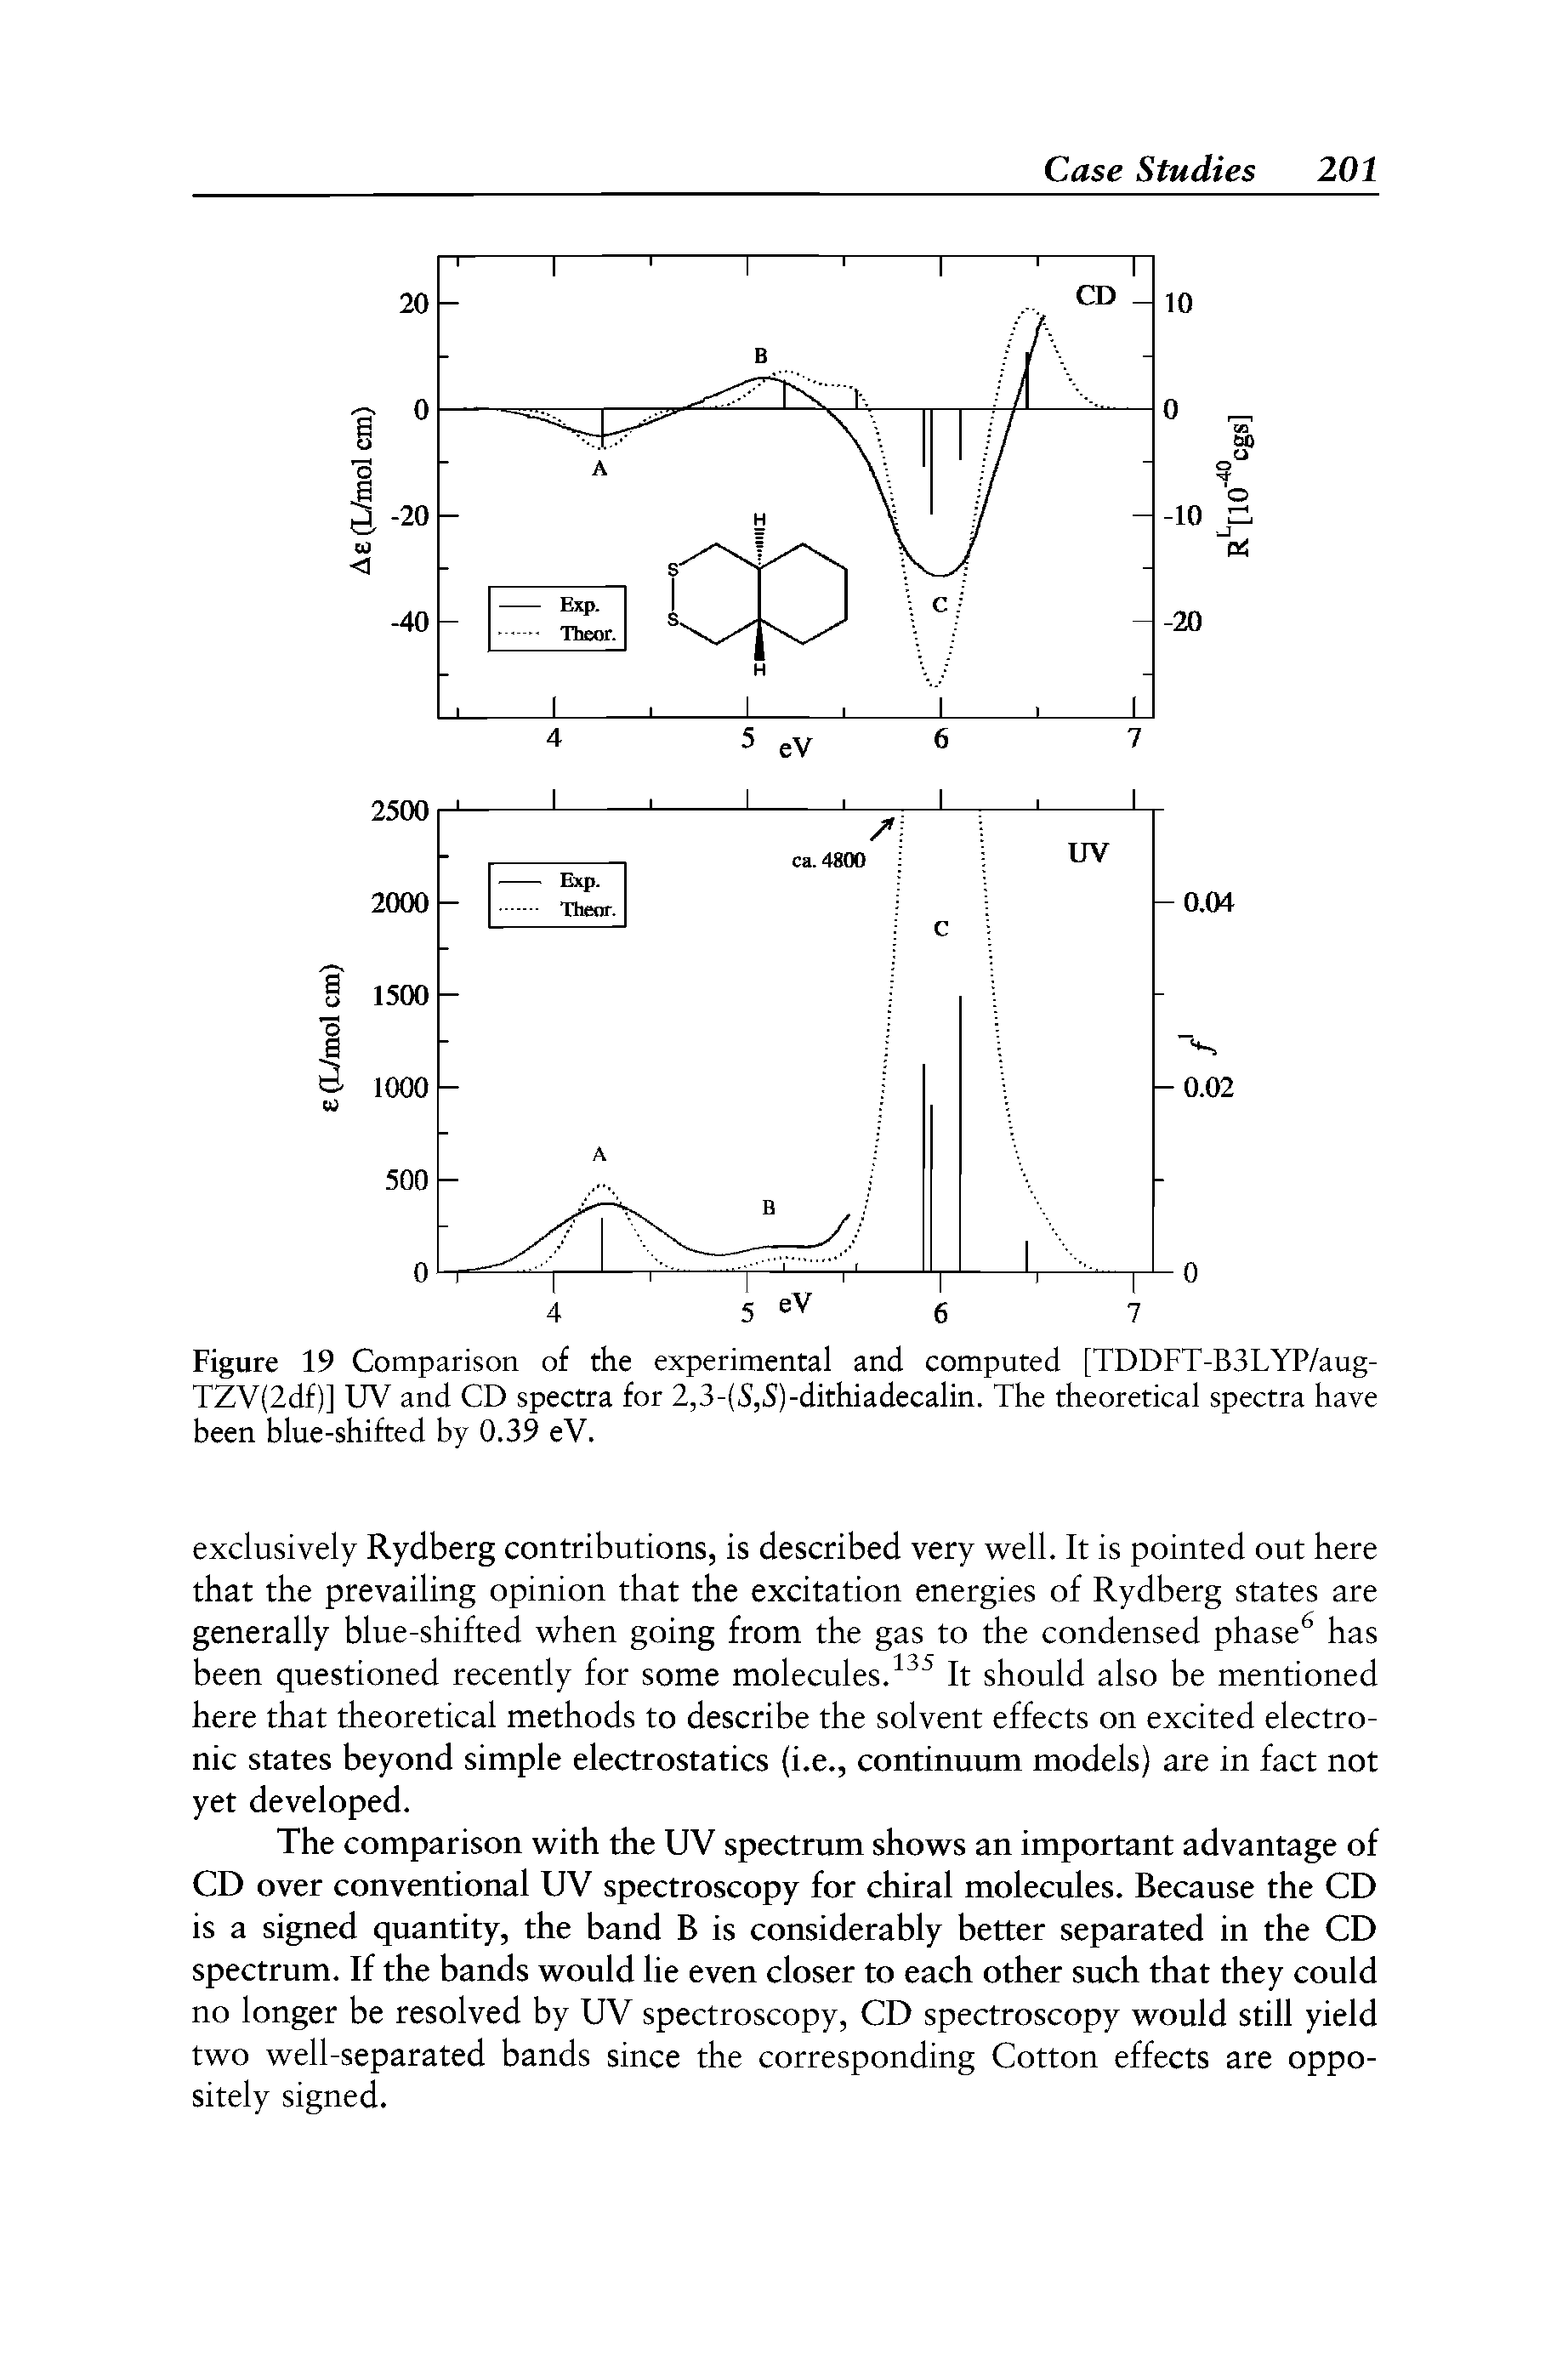 Figure 19 Comparison of the experimental and computed [TDDFT-B3LYP/aug-TZV(2df)] UV and CD spectra for 2,3-(5,5)-dithiadecalin. The theoretical spectra have been blue-shifted by 0.39 eV.